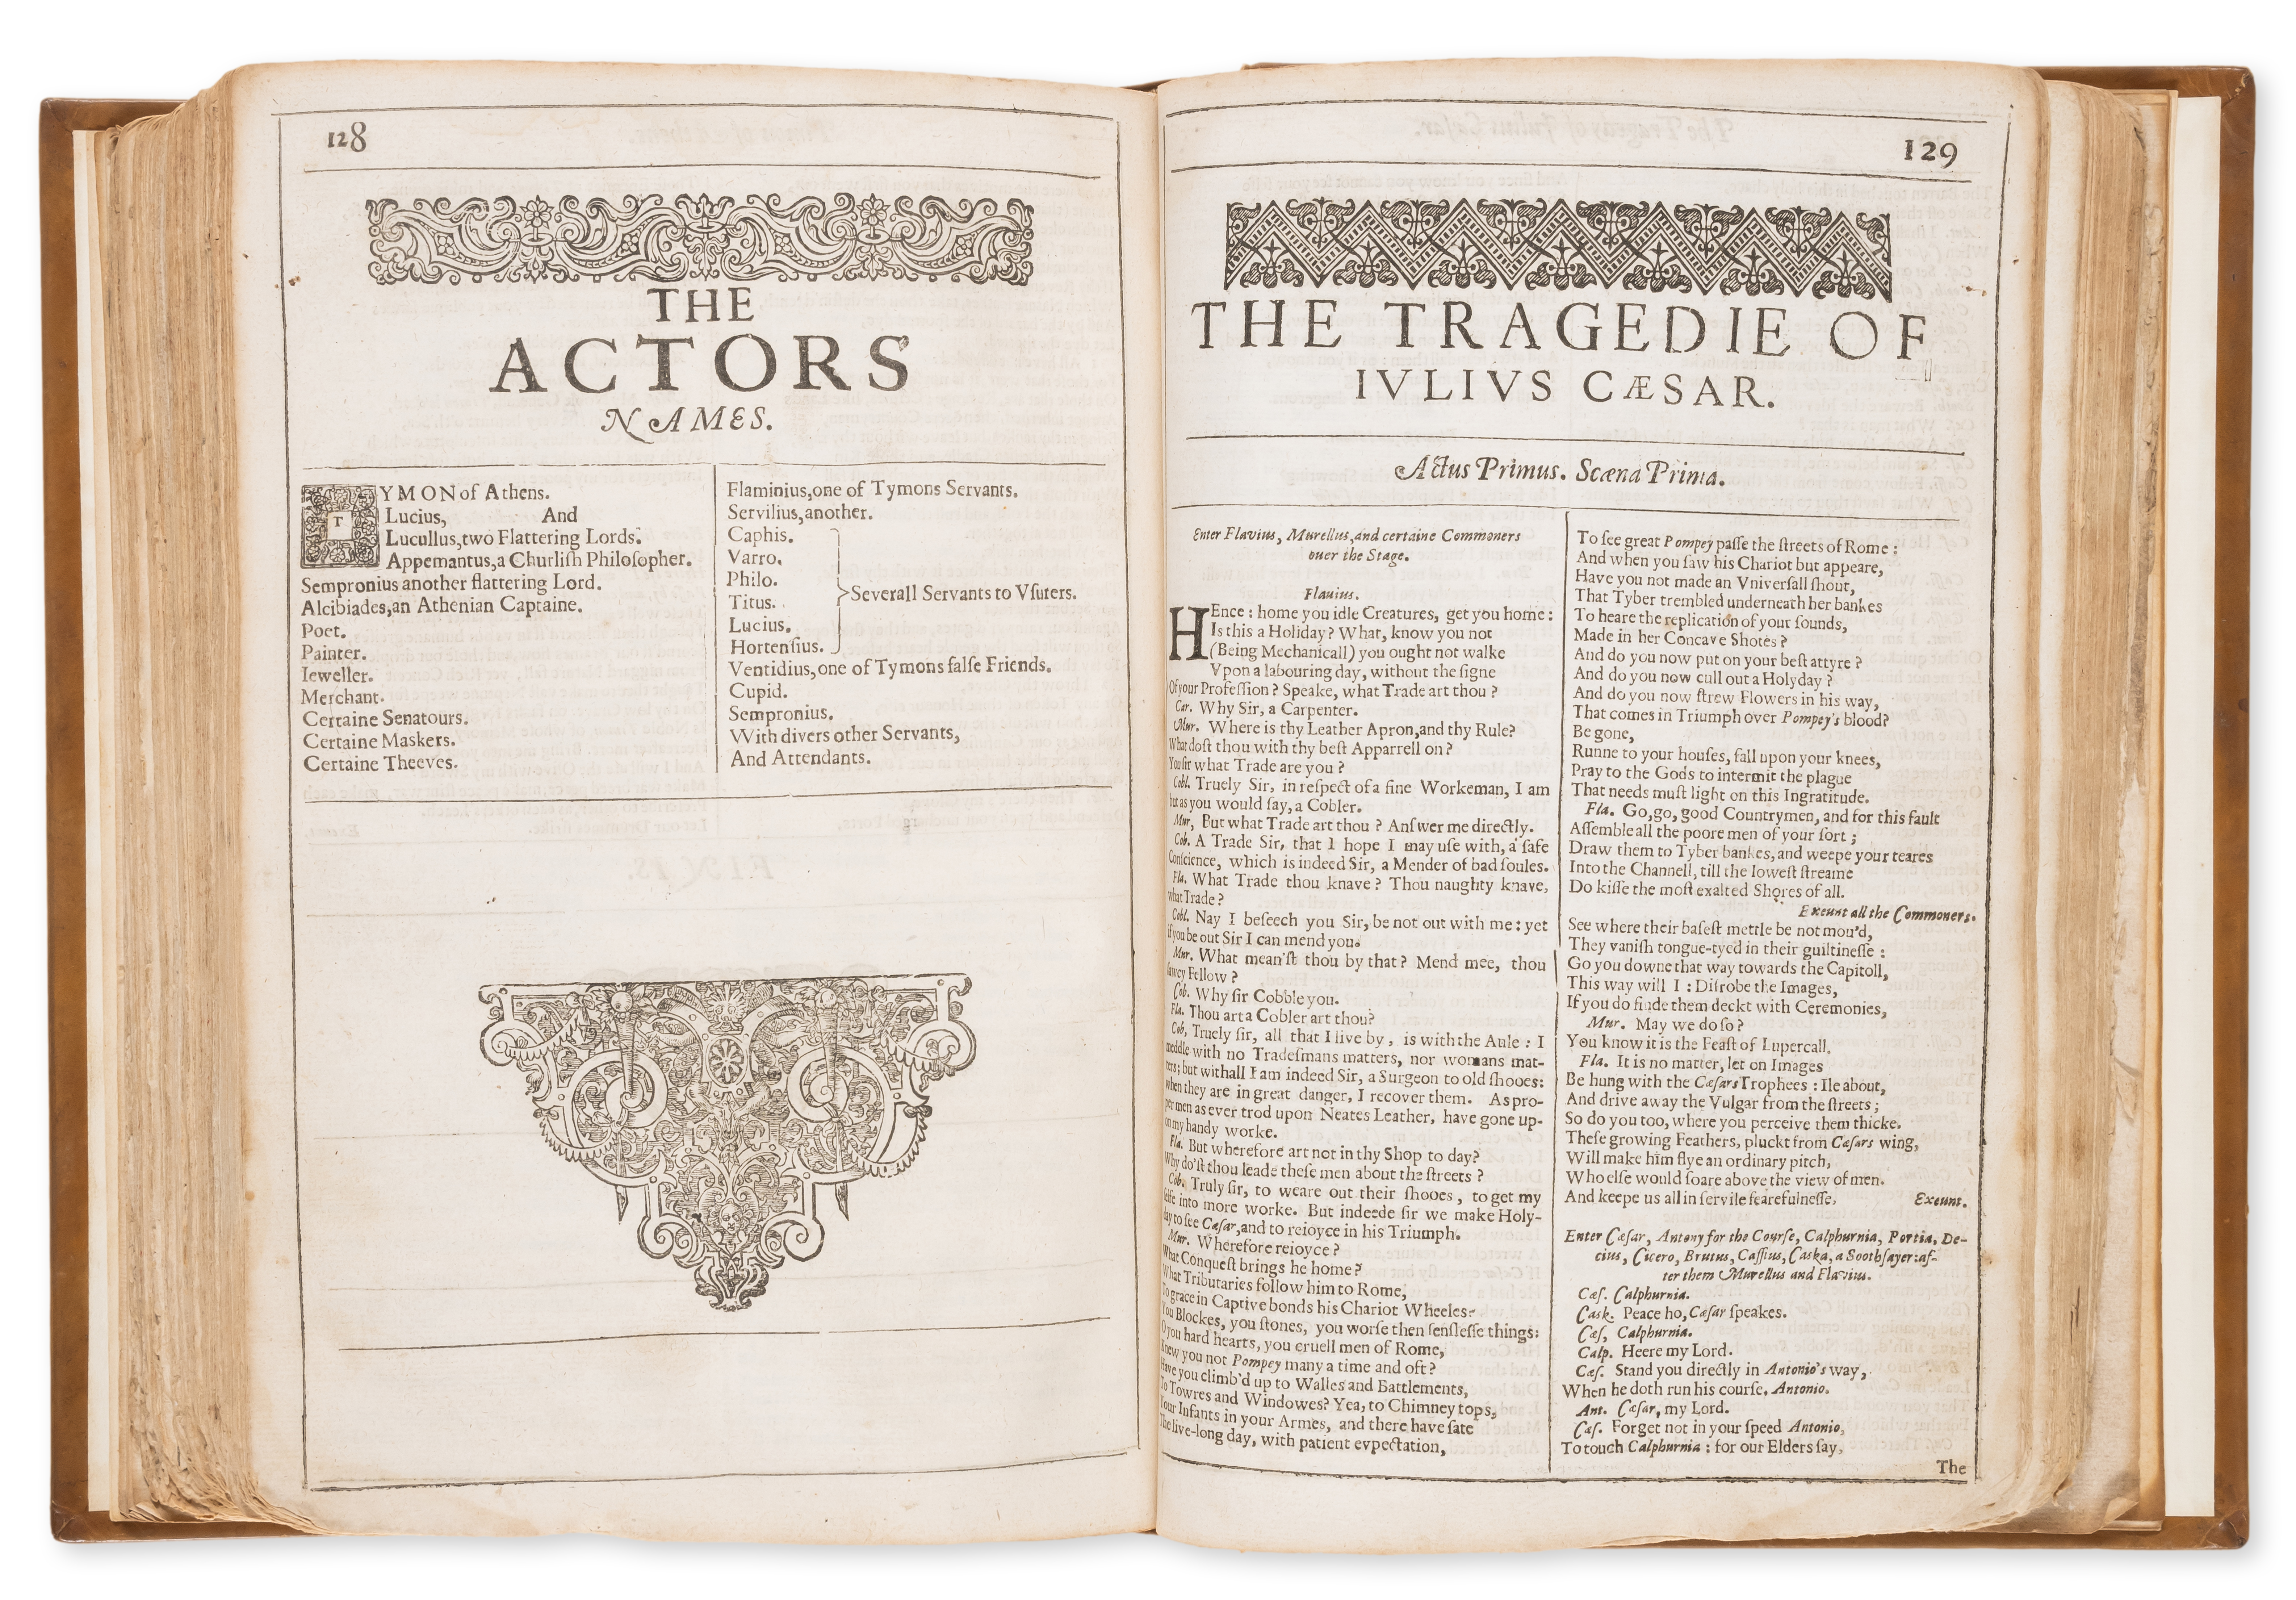 [Shakespeare (William)] [Comedies, Histories, and Tragedies], second folio edition, [by Tho.Cotes... - Image 4 of 5